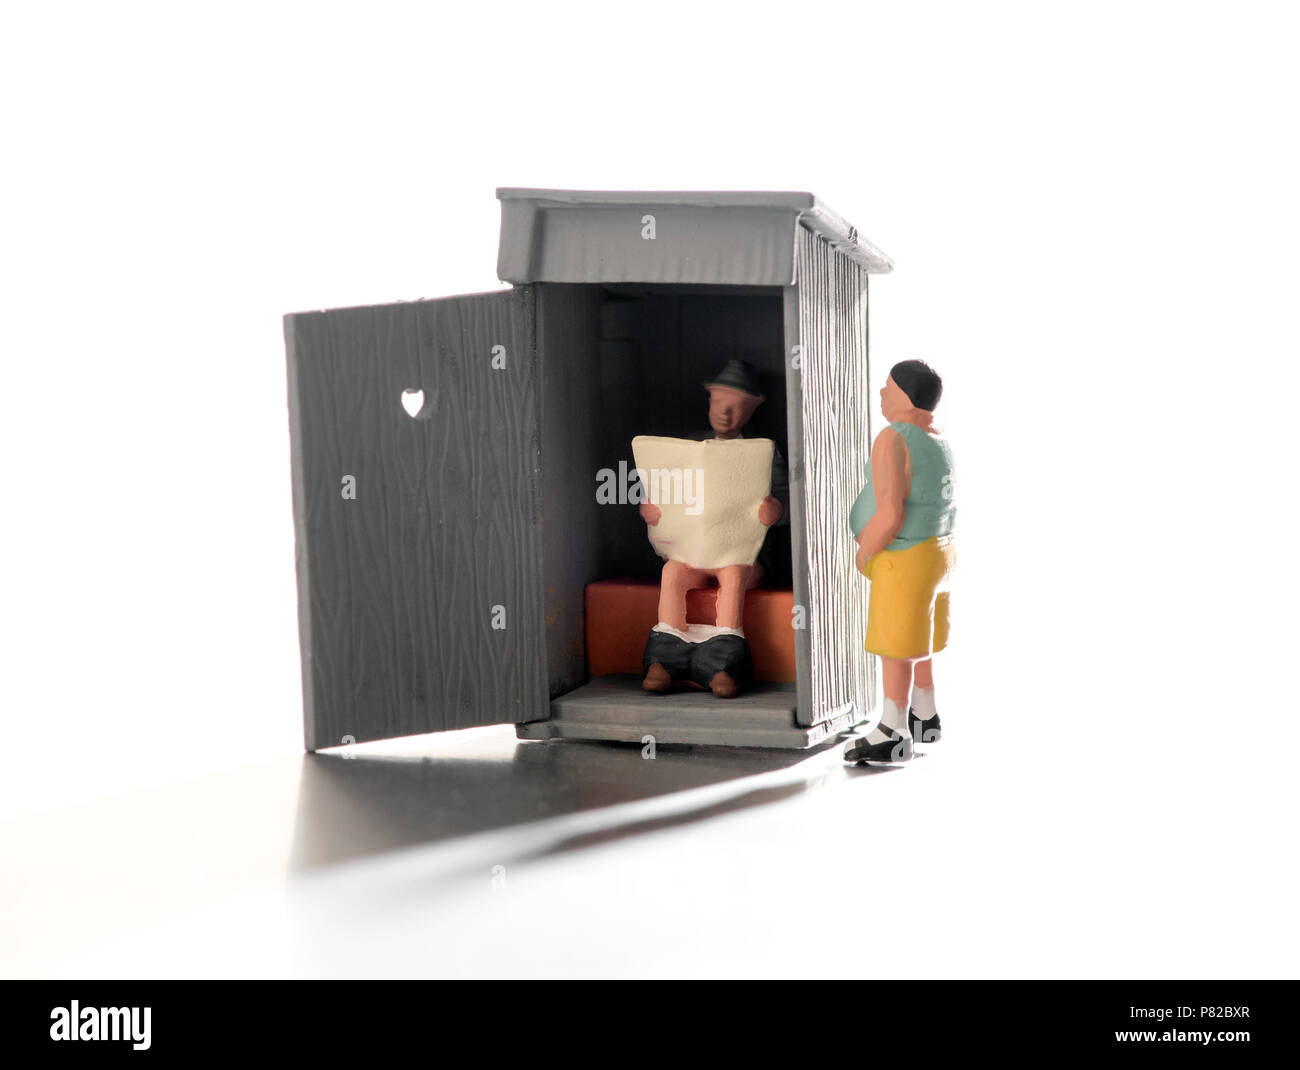 Fun scene of miniature people using an outdoor toilet with one person sitting reading inside the hut with the door open as a second waits impatiently  Stock Photo